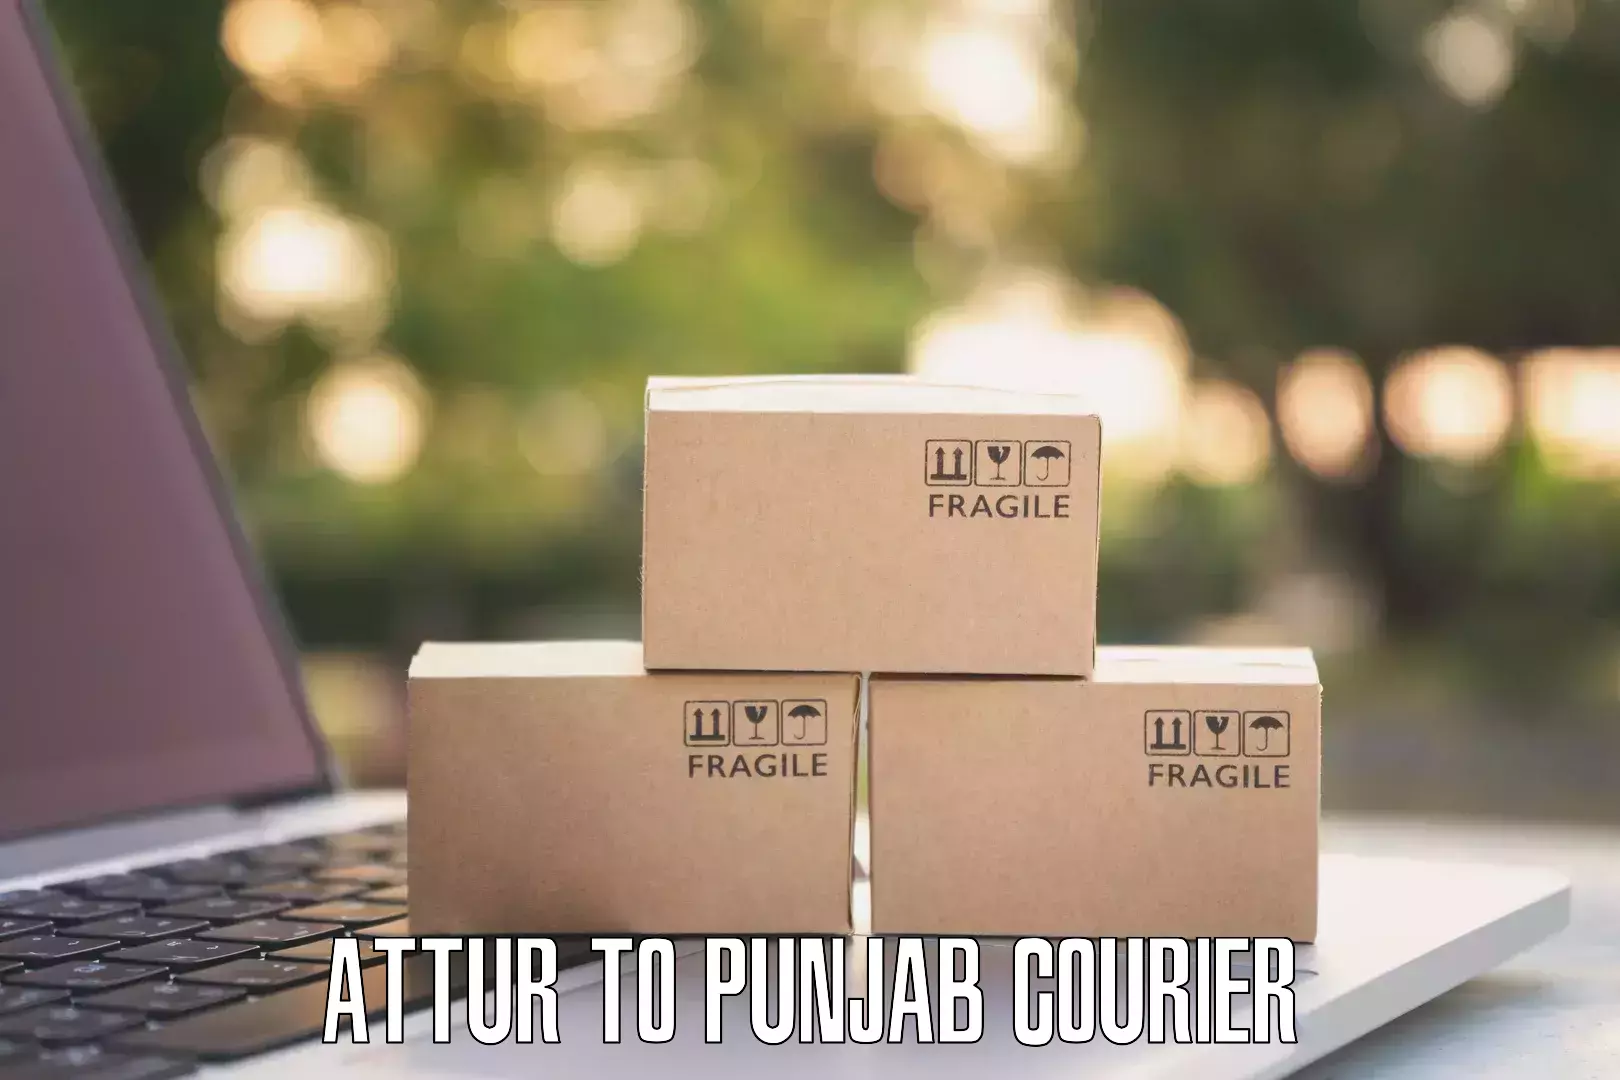 Customer-friendly courier services Attur to Faridkot